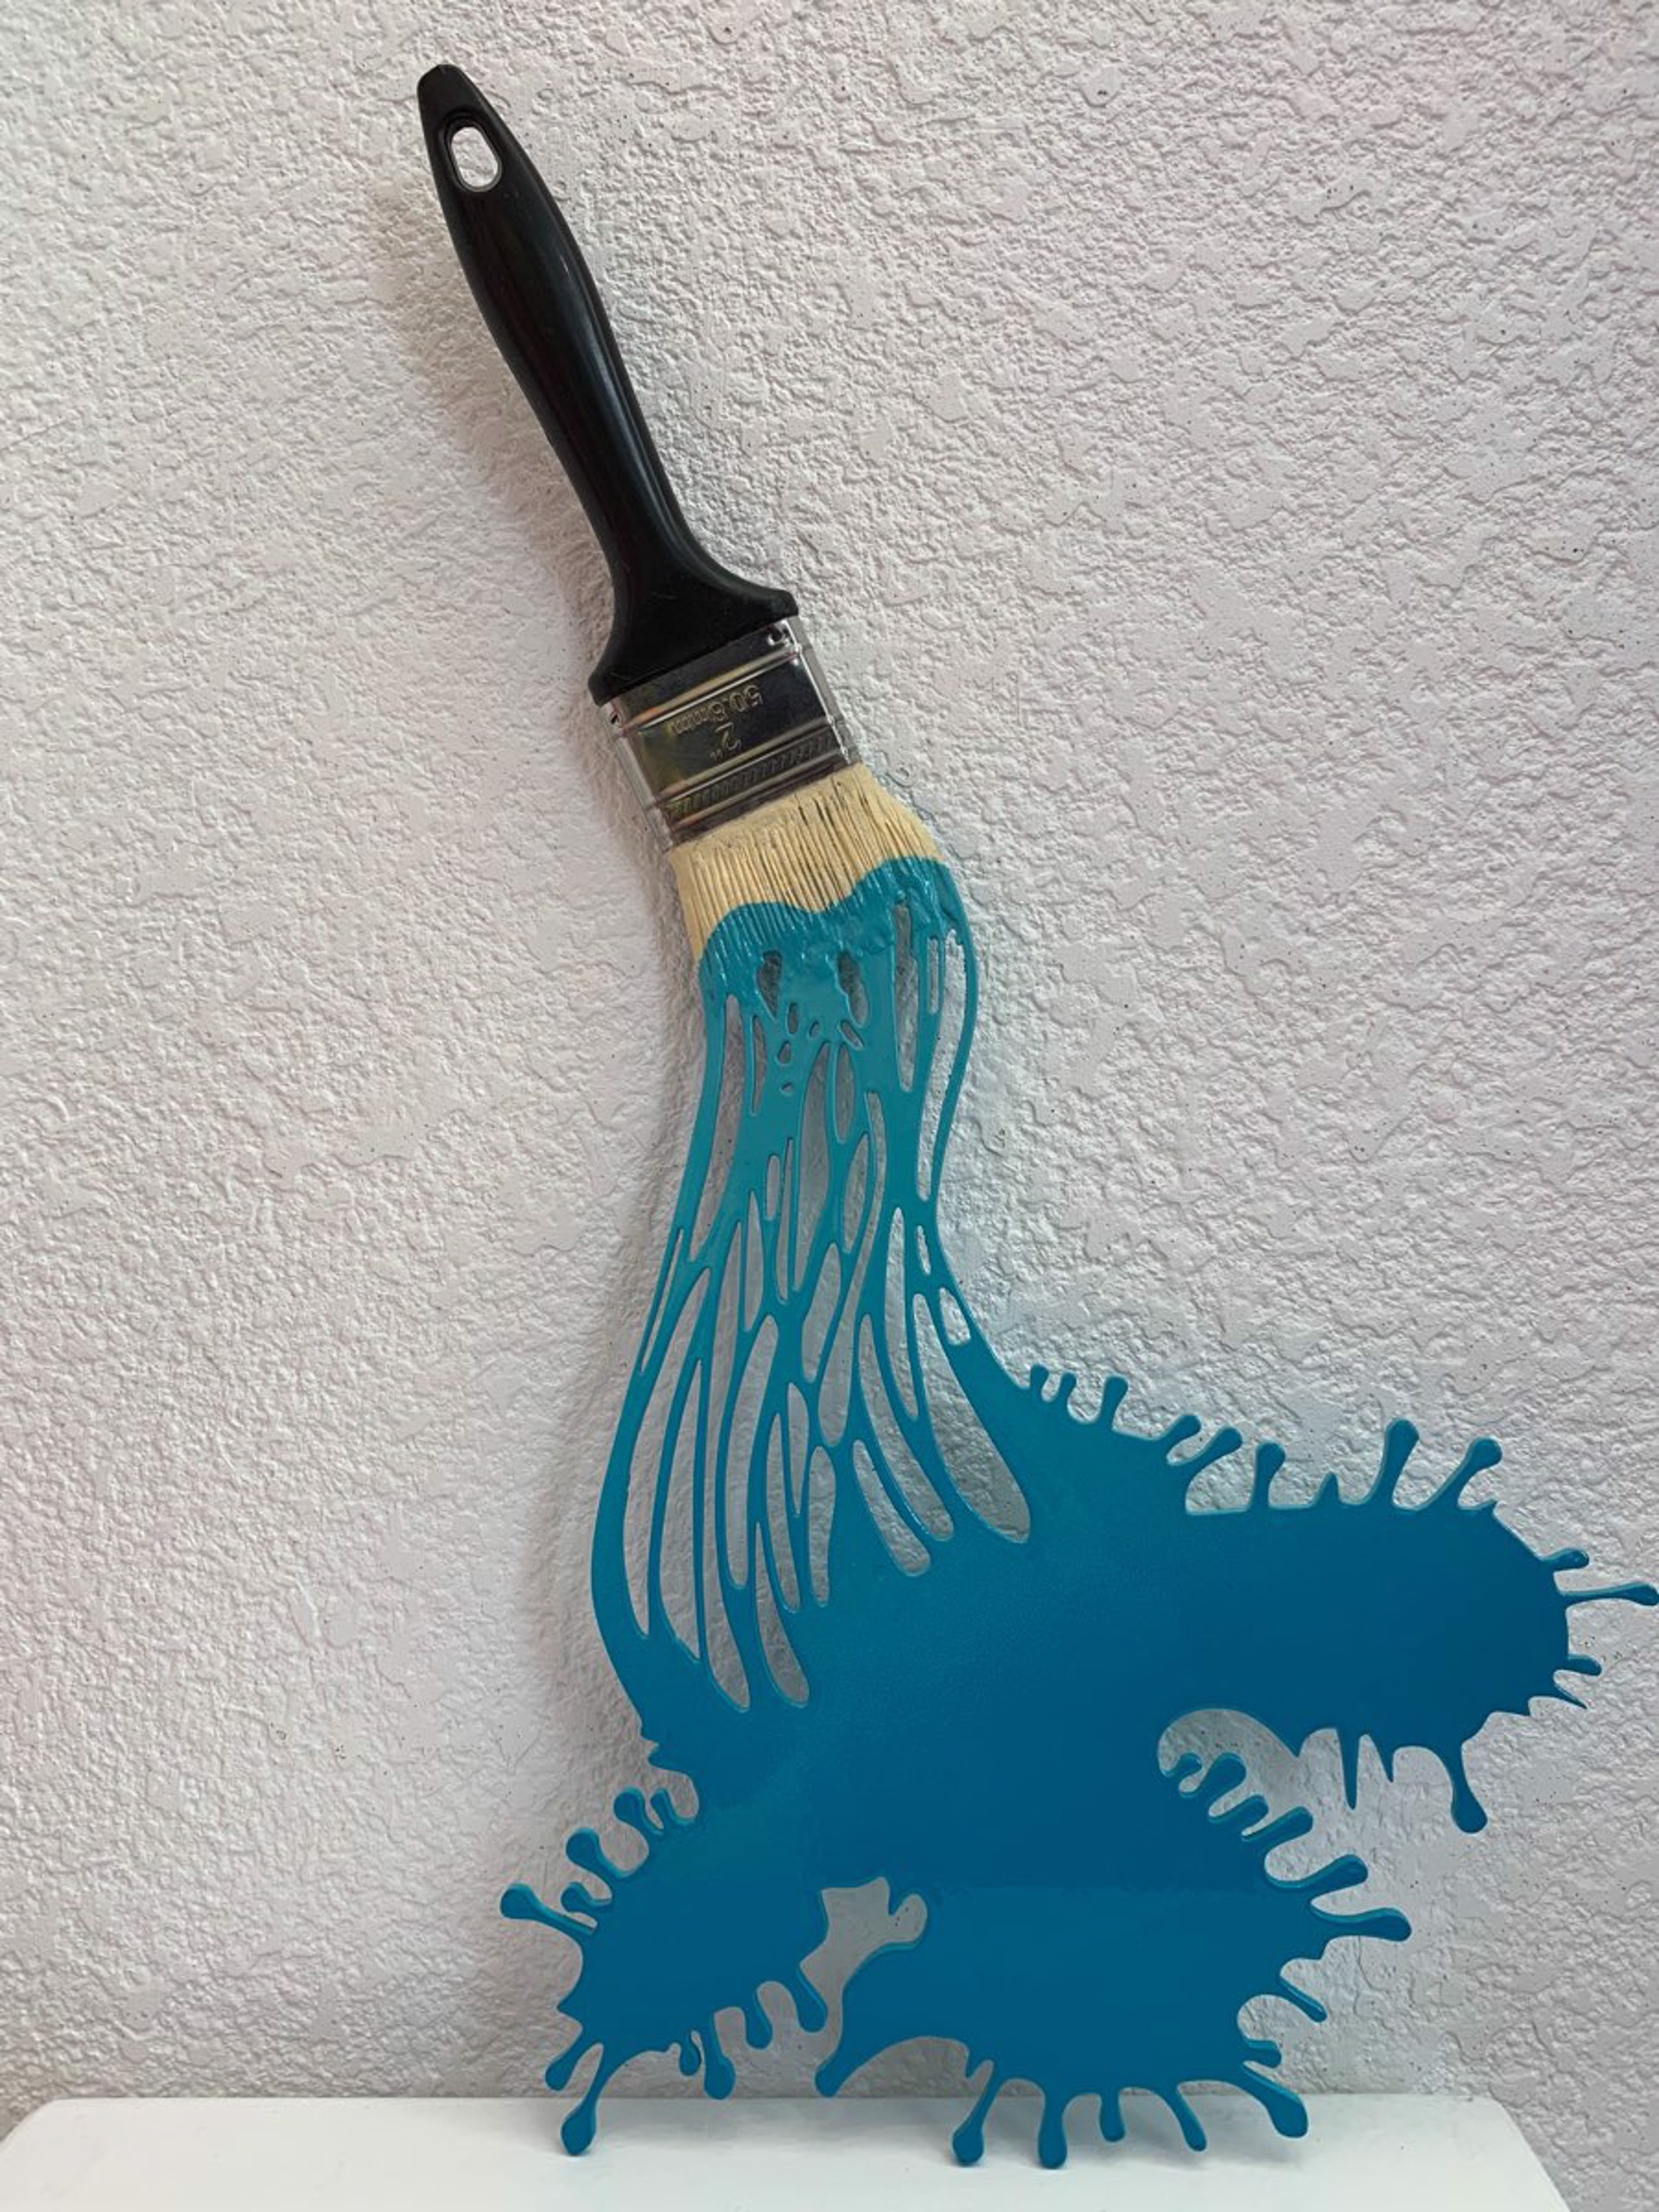 Sky Blue Metal Small Brush  by Brushes and Rollers "Let's Paint" by Efi Mashiah